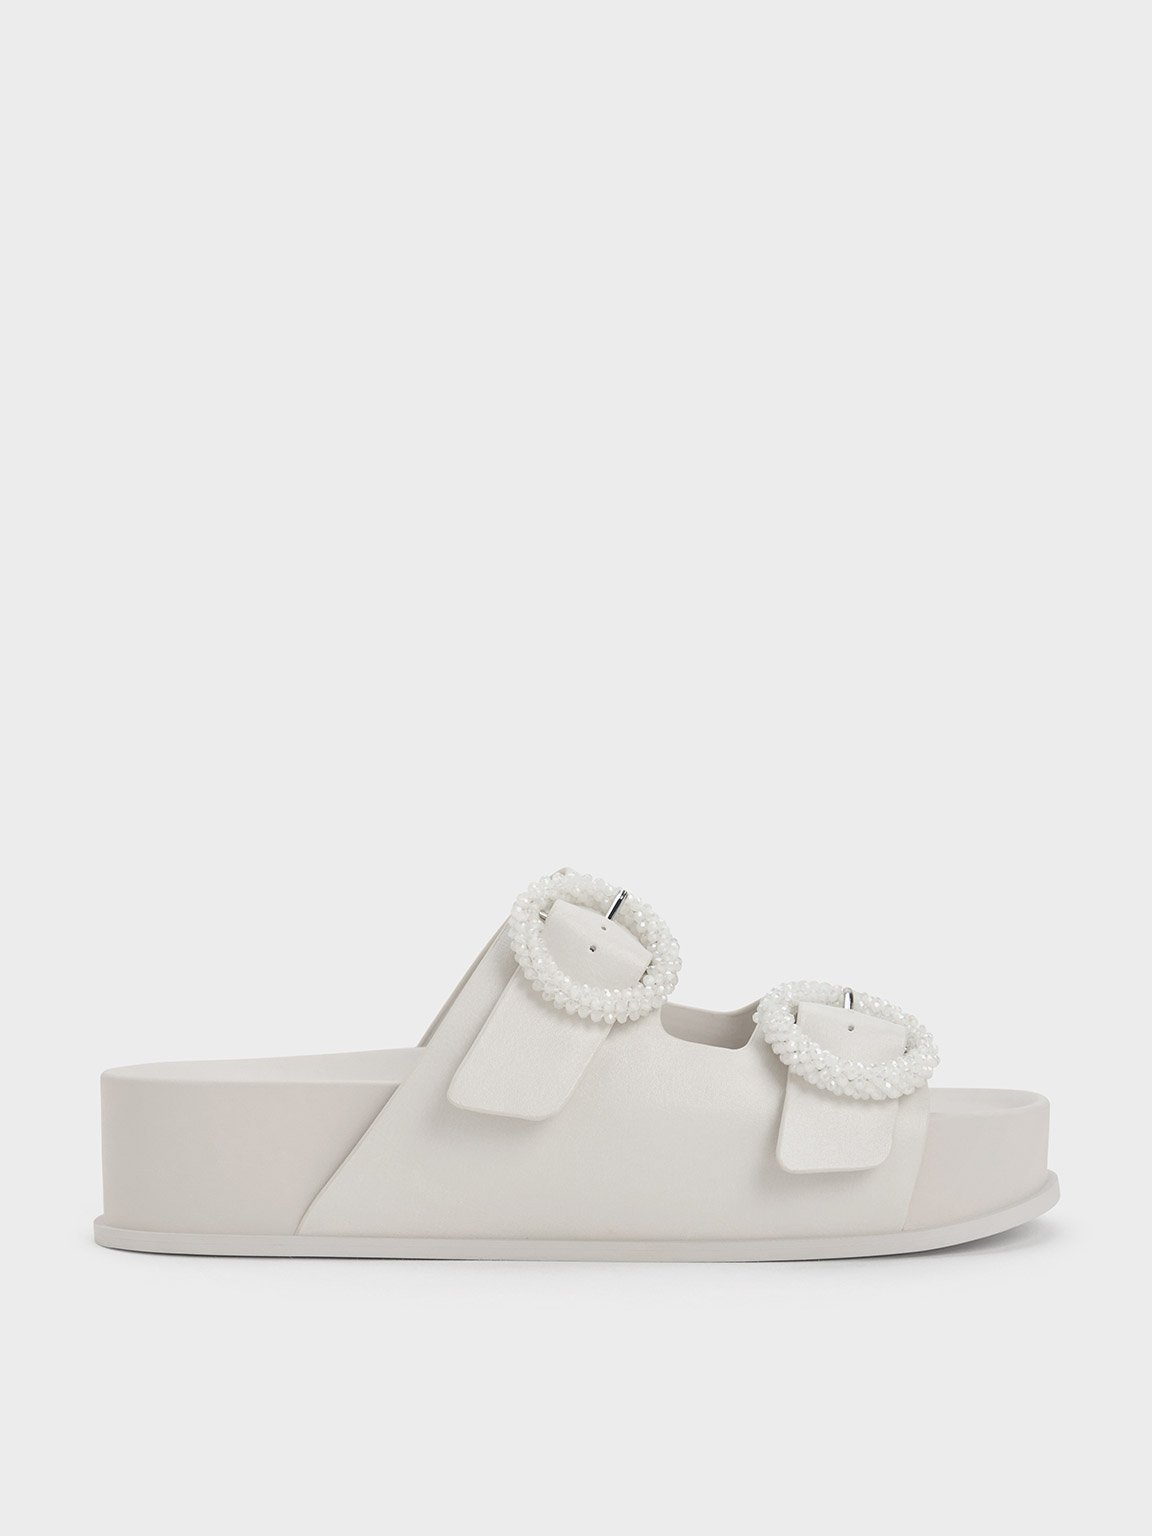 Charles & Keith Beaded Circle Slide Sandals In White